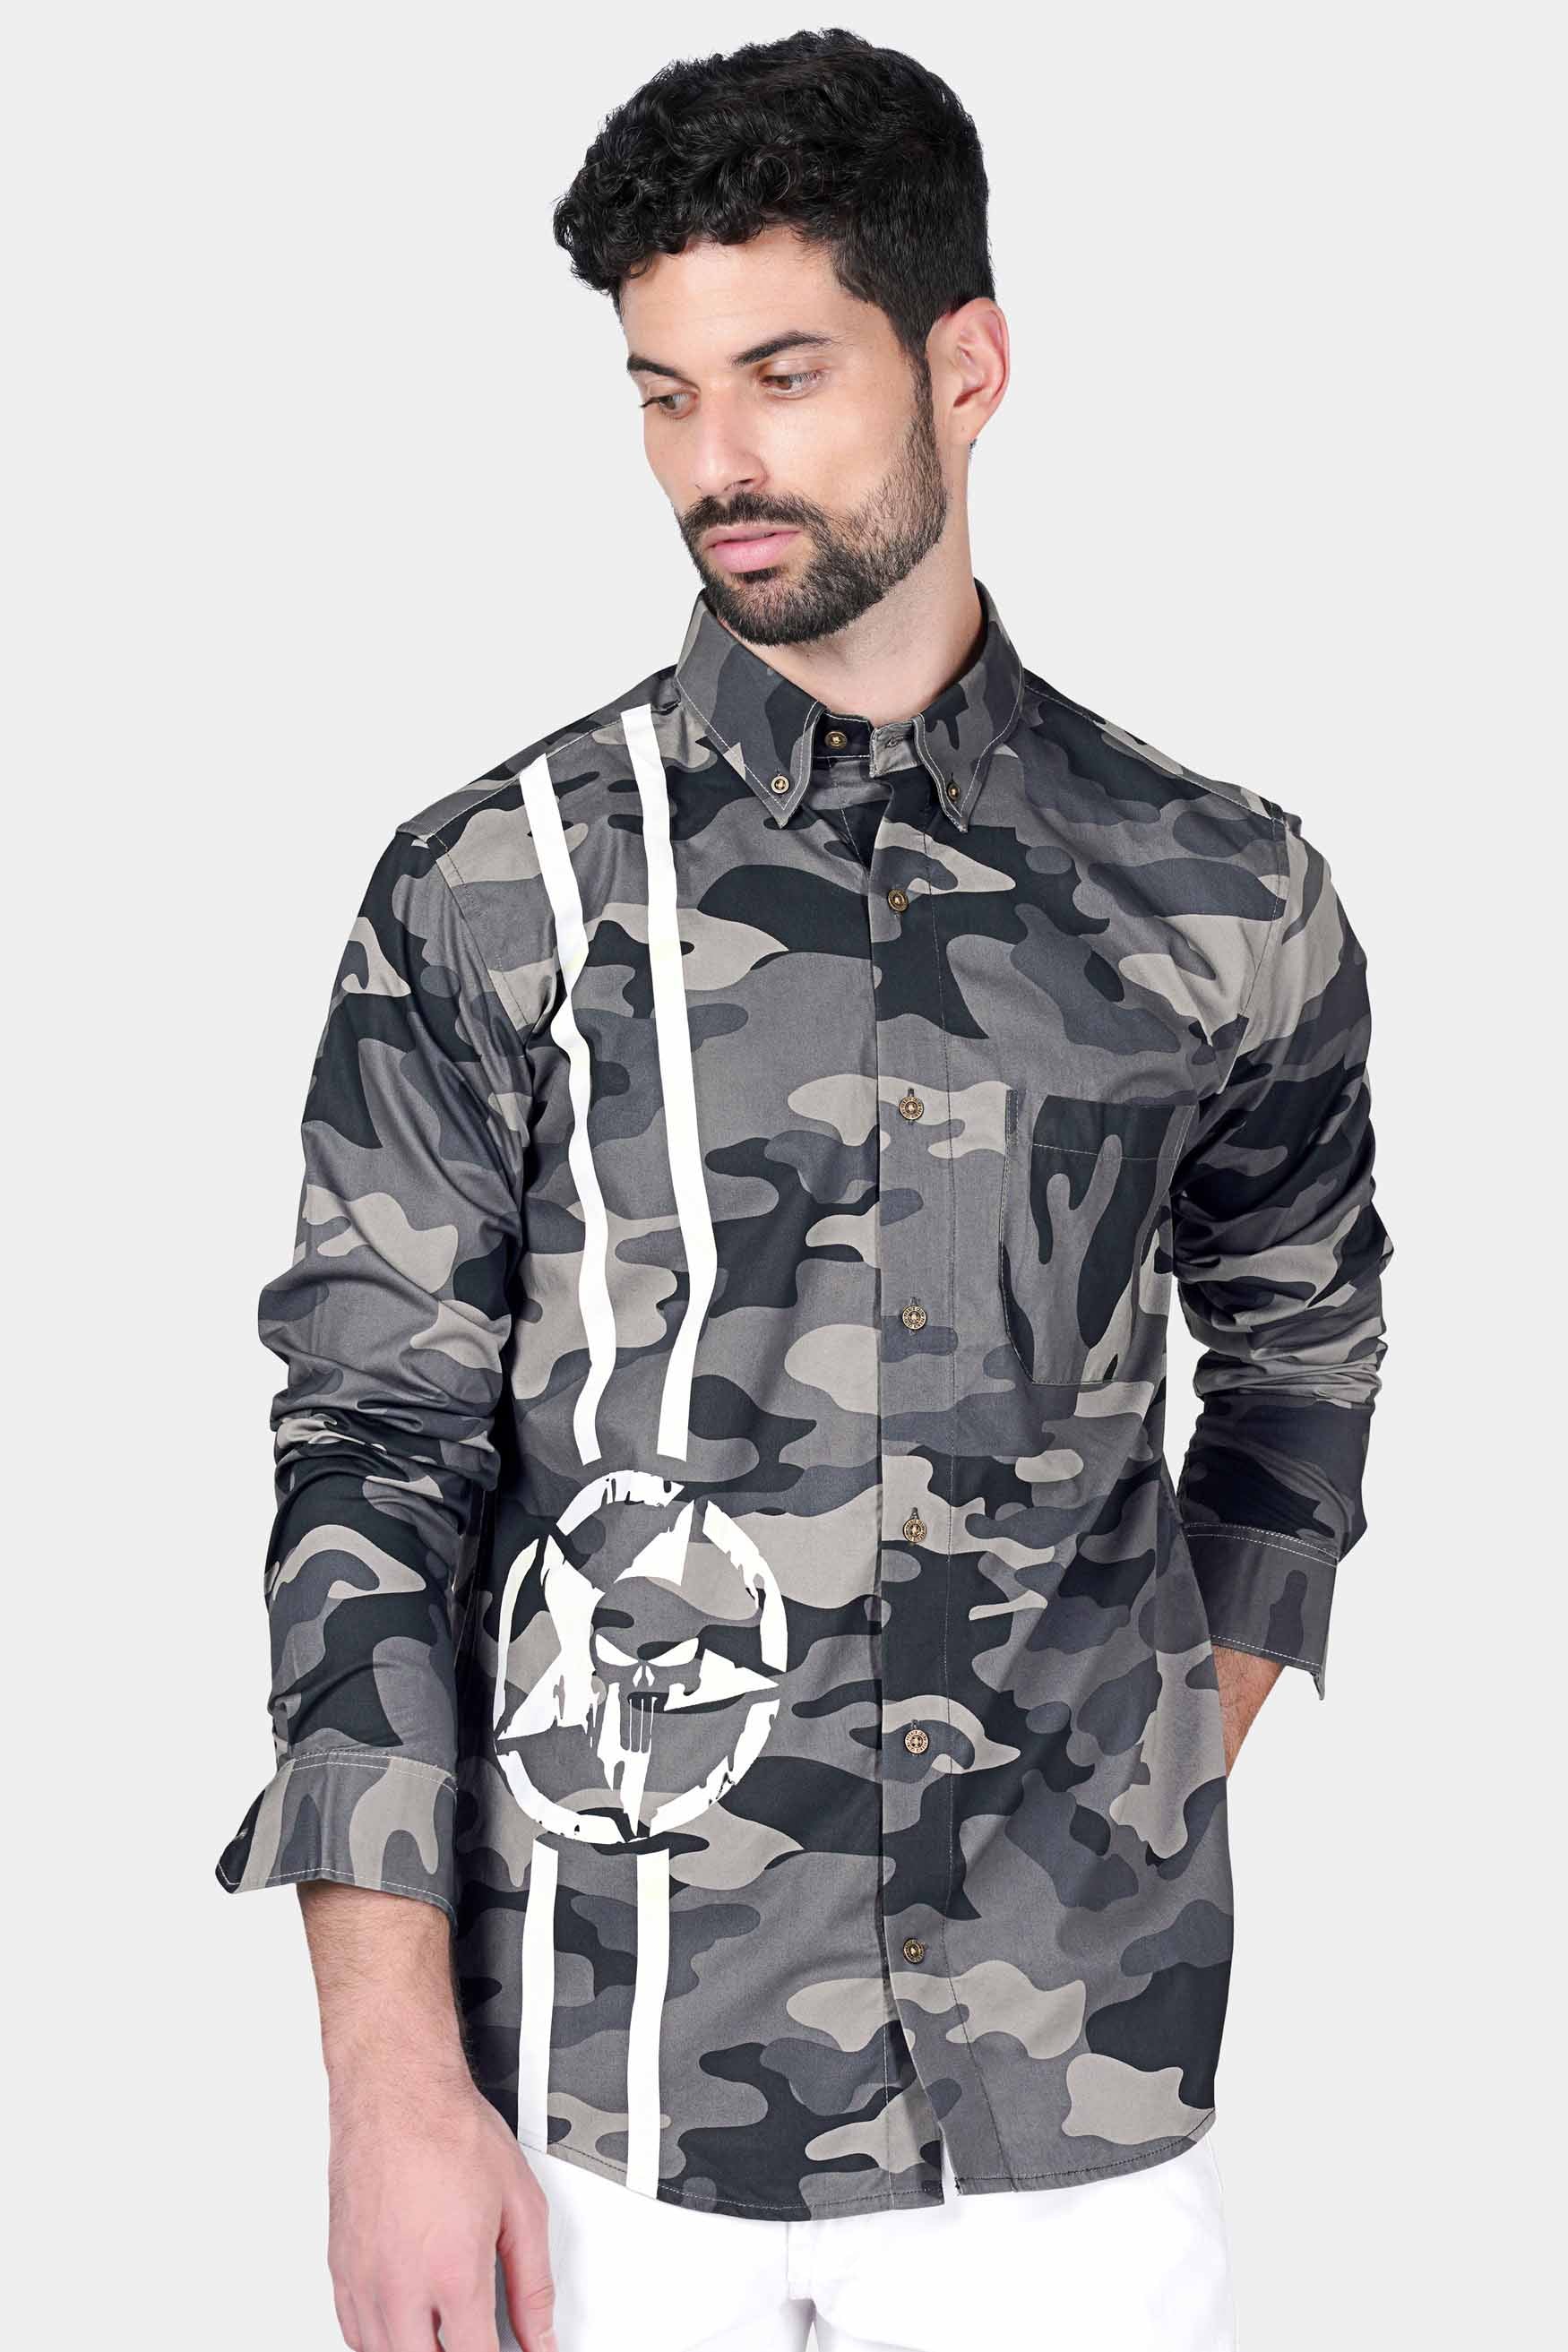 Ironside Gray and Cape Cod Gray Camouflage Printed Royal Oxford Designer Shirt 8892-BD-RPRT114-38, 8892-BD-RPRT114-H-38, 8892-BD-RPRT114-39, 8892-BD-RPRT114-H-39, 8892-BD-RPRT114-40, 8892-BD-RPRT114-H-40, 8892-BD-RPRT114-42, 8892-BD-RPRT114-H-42, 8892-BD-RPRT114-44, 8892-BD-RPRT114-H-44, 8892-BD-RPRT114-46, 8892-BD-RPRT114-H-46, 8892-BD-RPRT114-48, 8892-BD-RPRT114-H-48, 8892-BD-RPRT114-50, 8892-BD-RPRT114-H-50, 8892-BD-RPRT114-52, 8892-BD-RPRT114-H-52